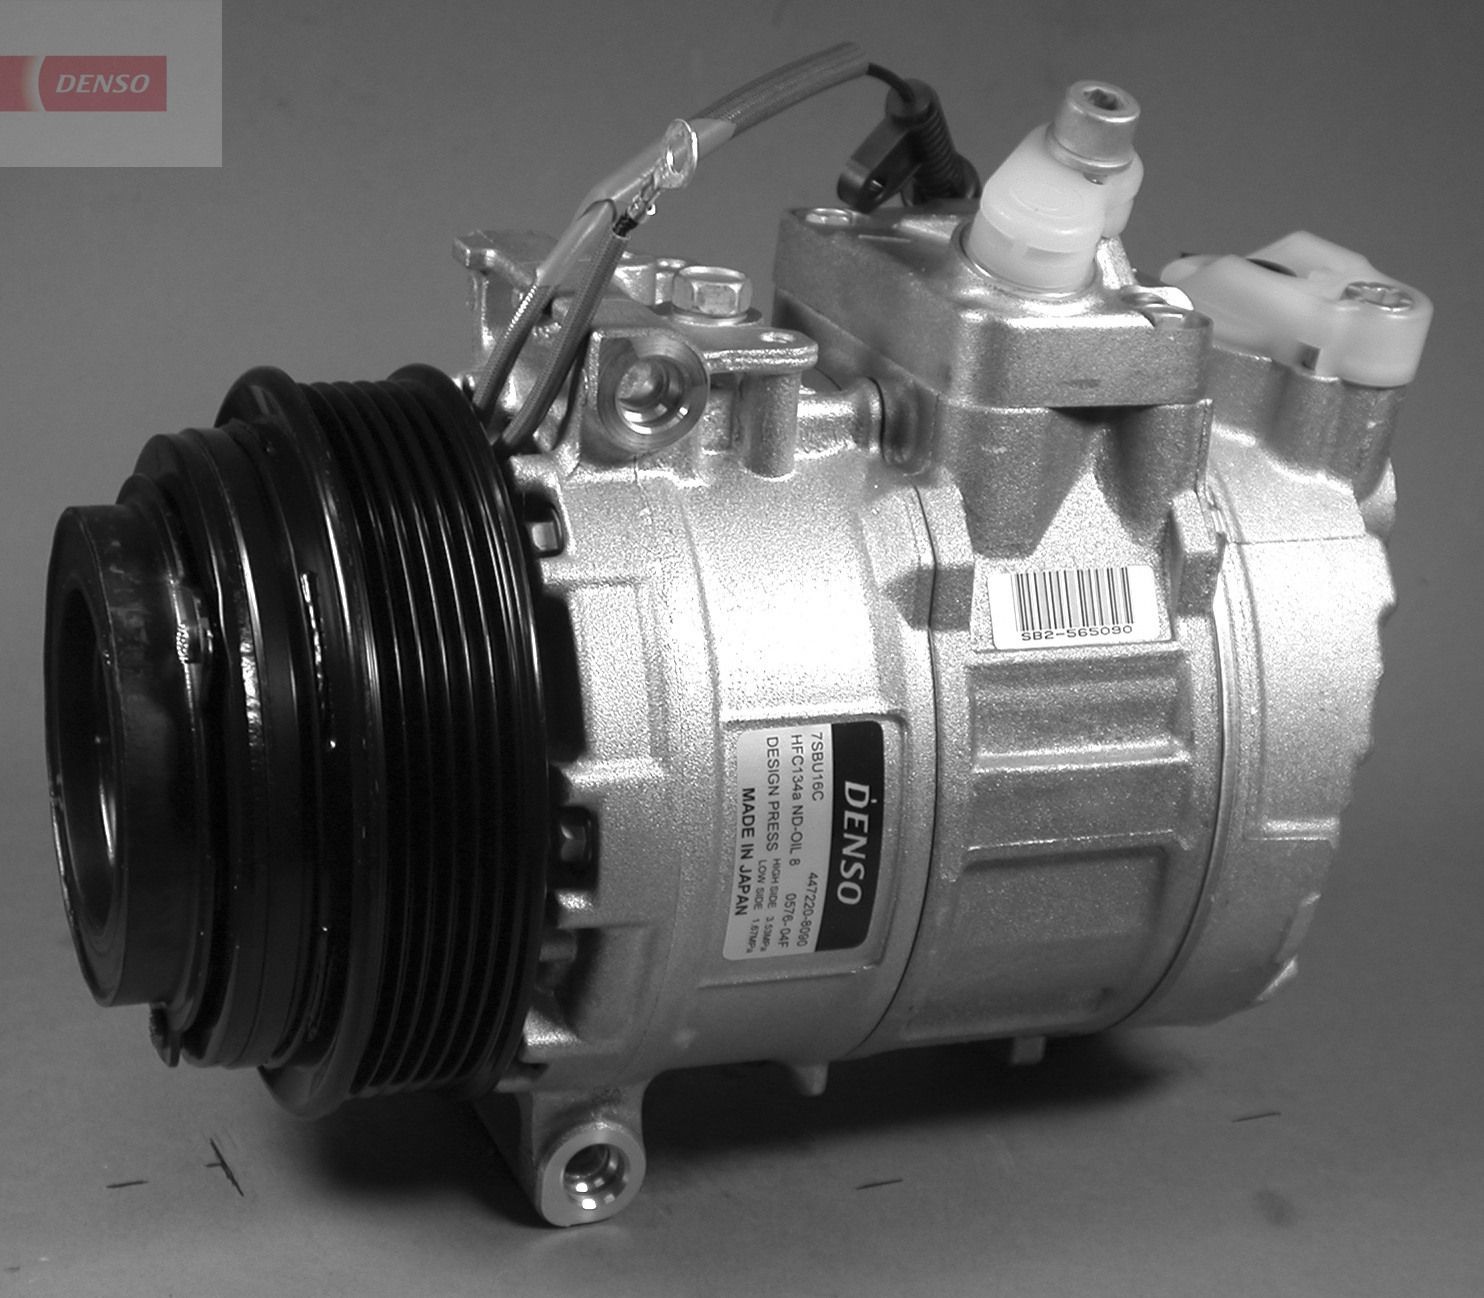 DENSO DCP17036 Air conditioning compressor 7SBU16C, 24V, PAG 46, R 134a, with magnetic clutch